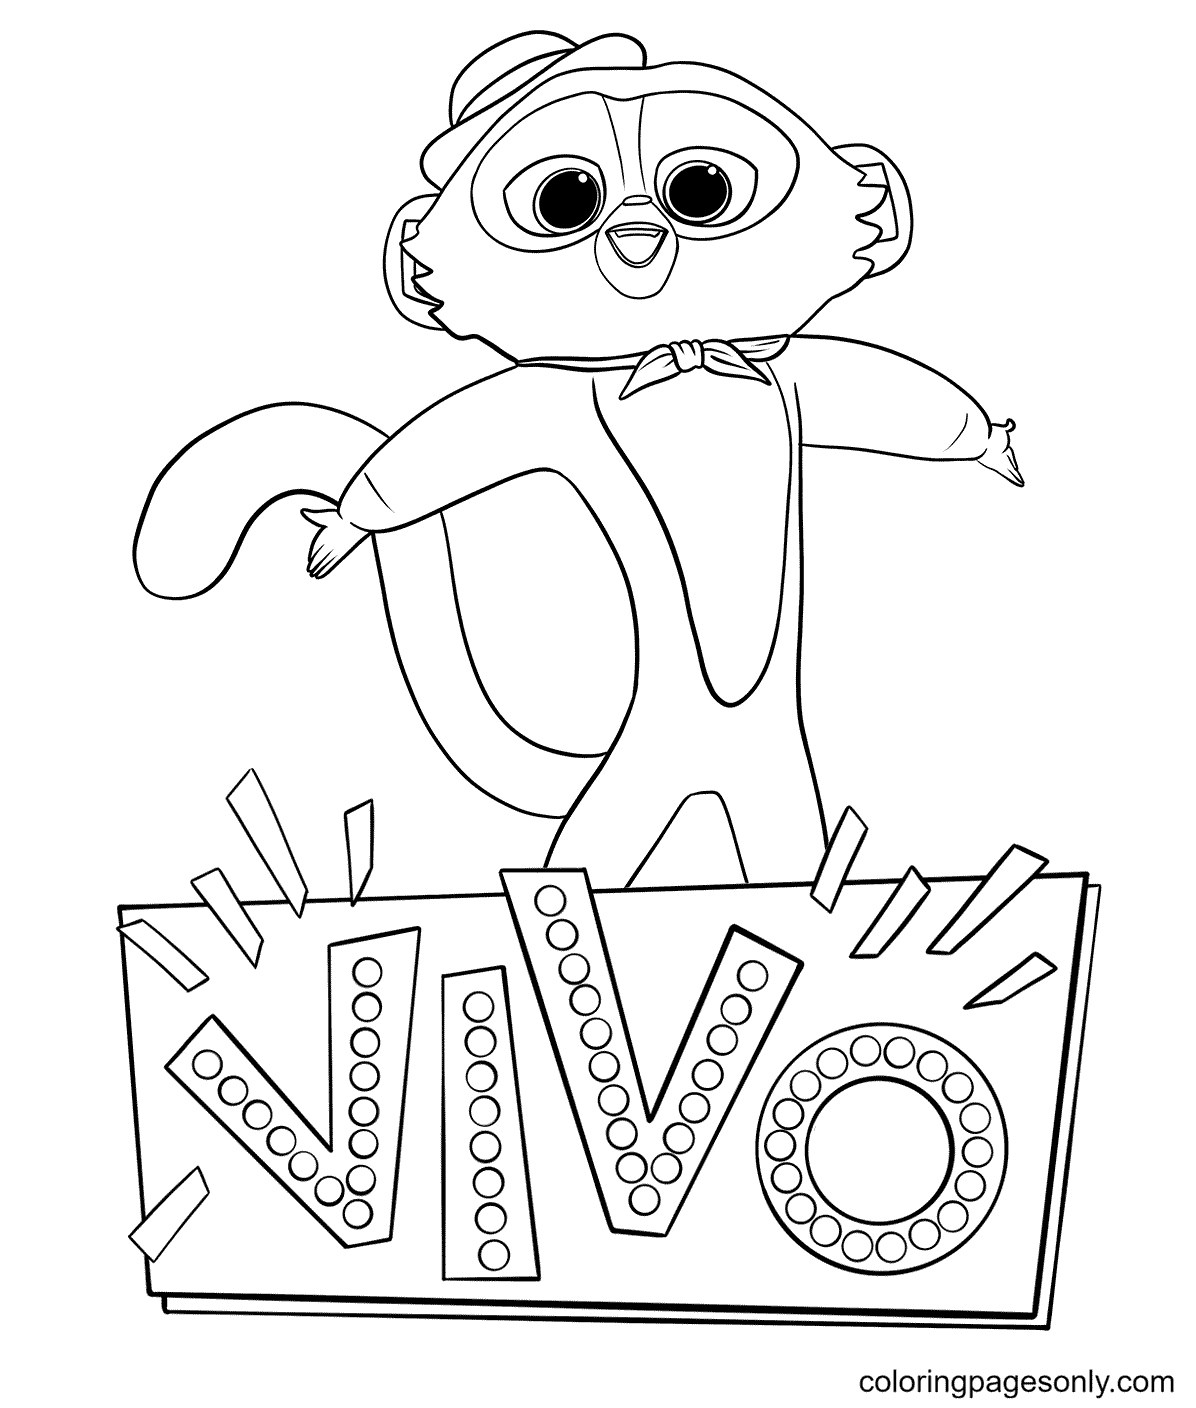 840 Cartoon Coloring Pages For Adults  Free